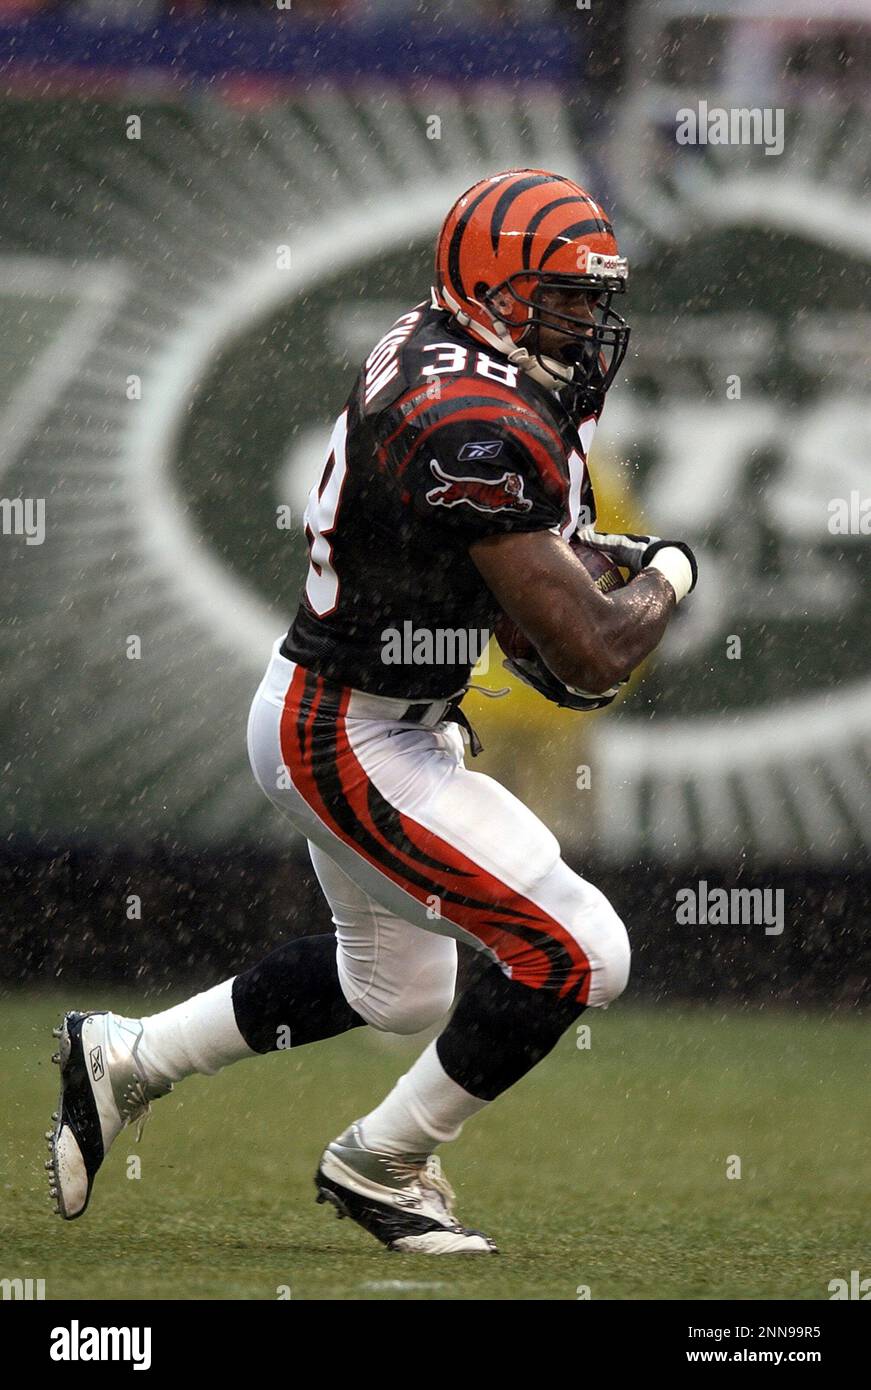 10 August 2003: Ray Jackson of the Cincinnati Bengals during the Jets 28-13  preseason victory over the Bengals at the Meadowlands in East Rutherford,  New Jersey. (Icon Sportswire via AP Images Stock Photo - Alamy